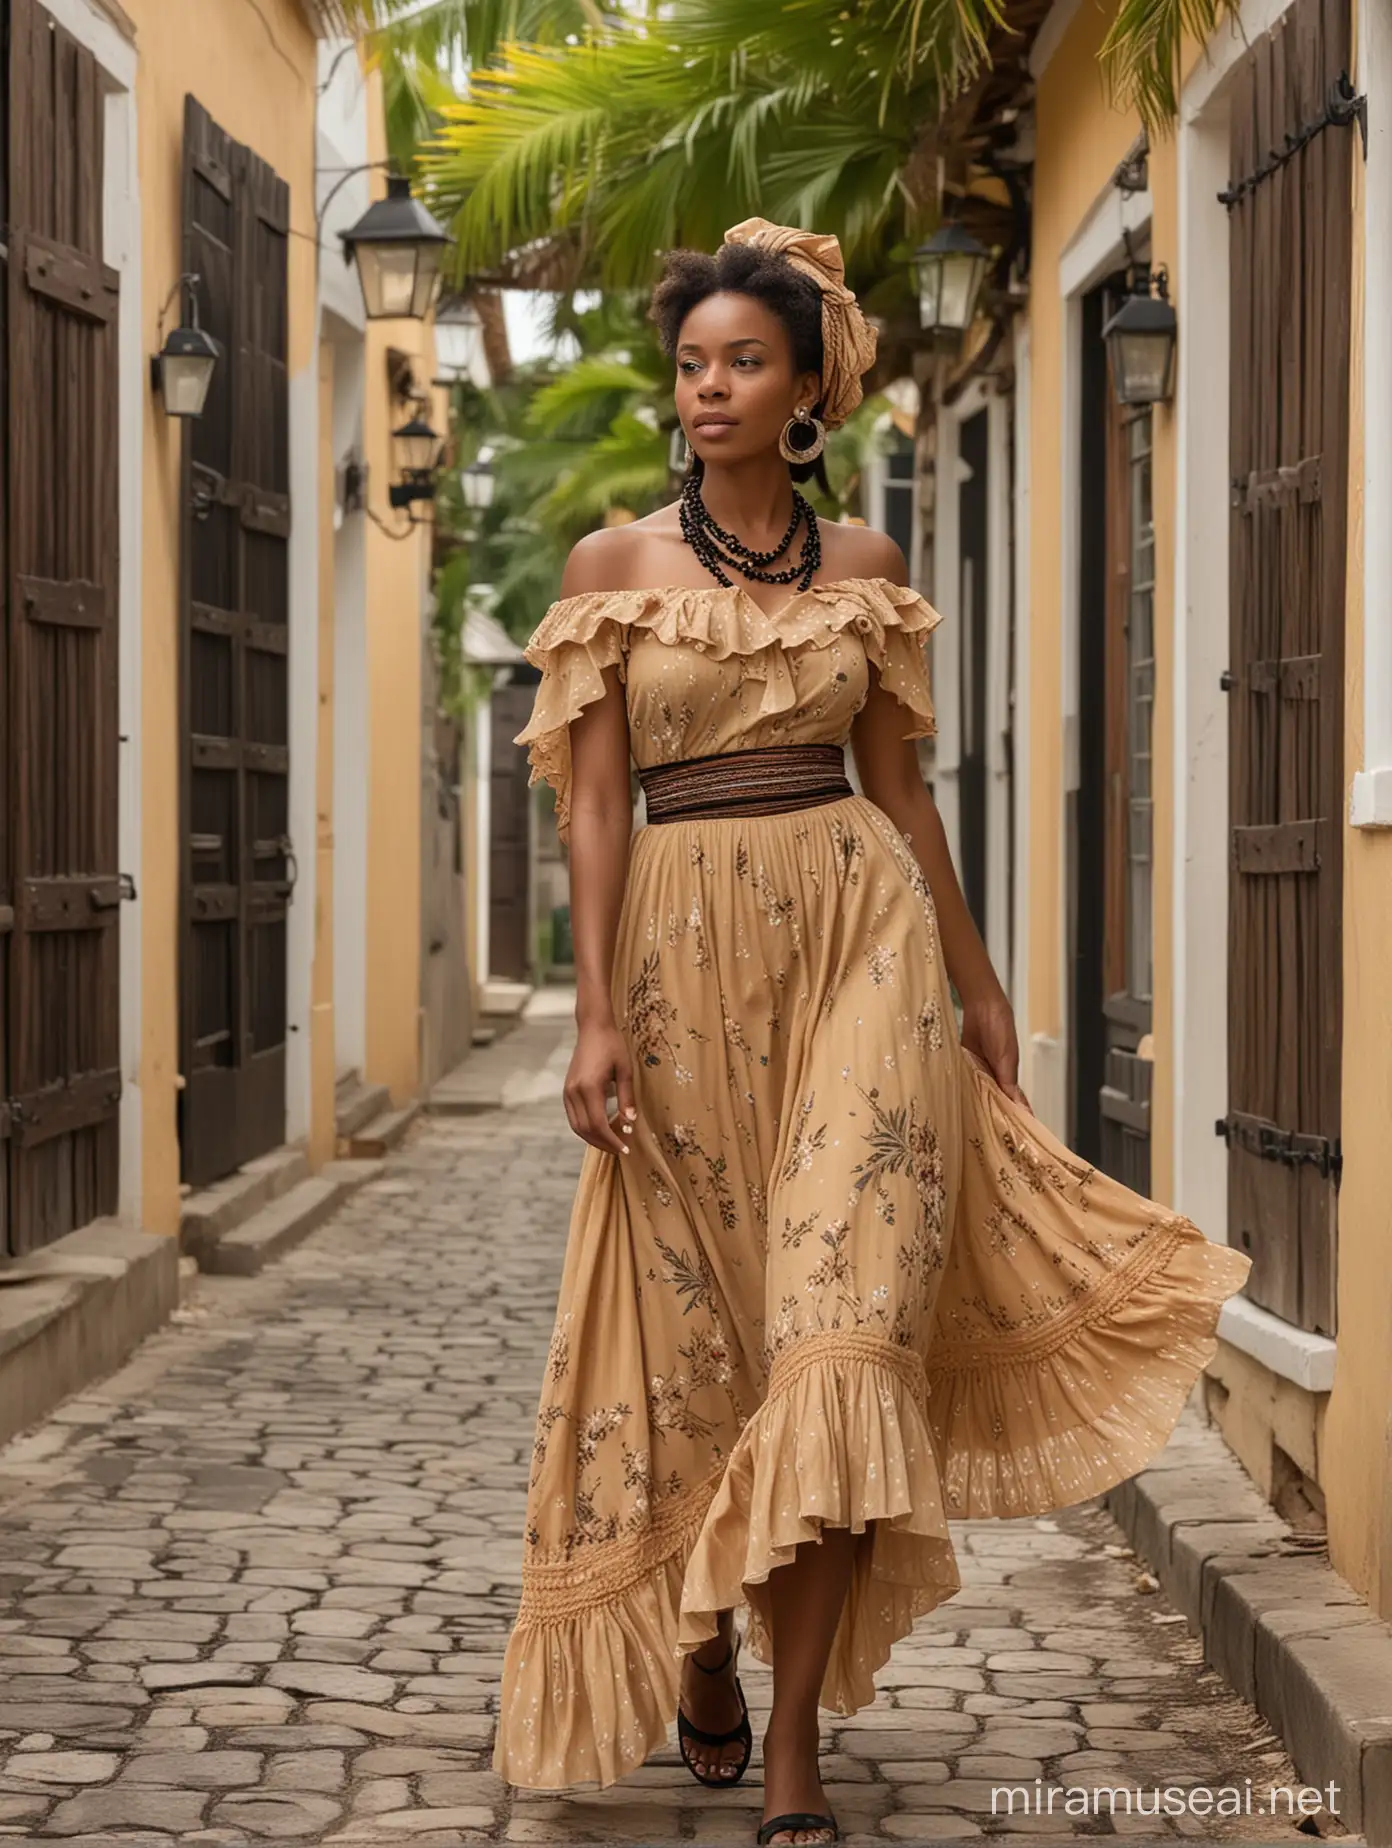 the beautiful carribean 1800s woman wearing a carribean dress an a elegant woman's scarf  walking in a near 1800s carribean house. in the style of light brown and dark black, 1800 s carribean influences, fashwave, candid celebrity shots, uhd image, body extensions, natural beauty --ar 69:128 --s 750 --v 5. 2